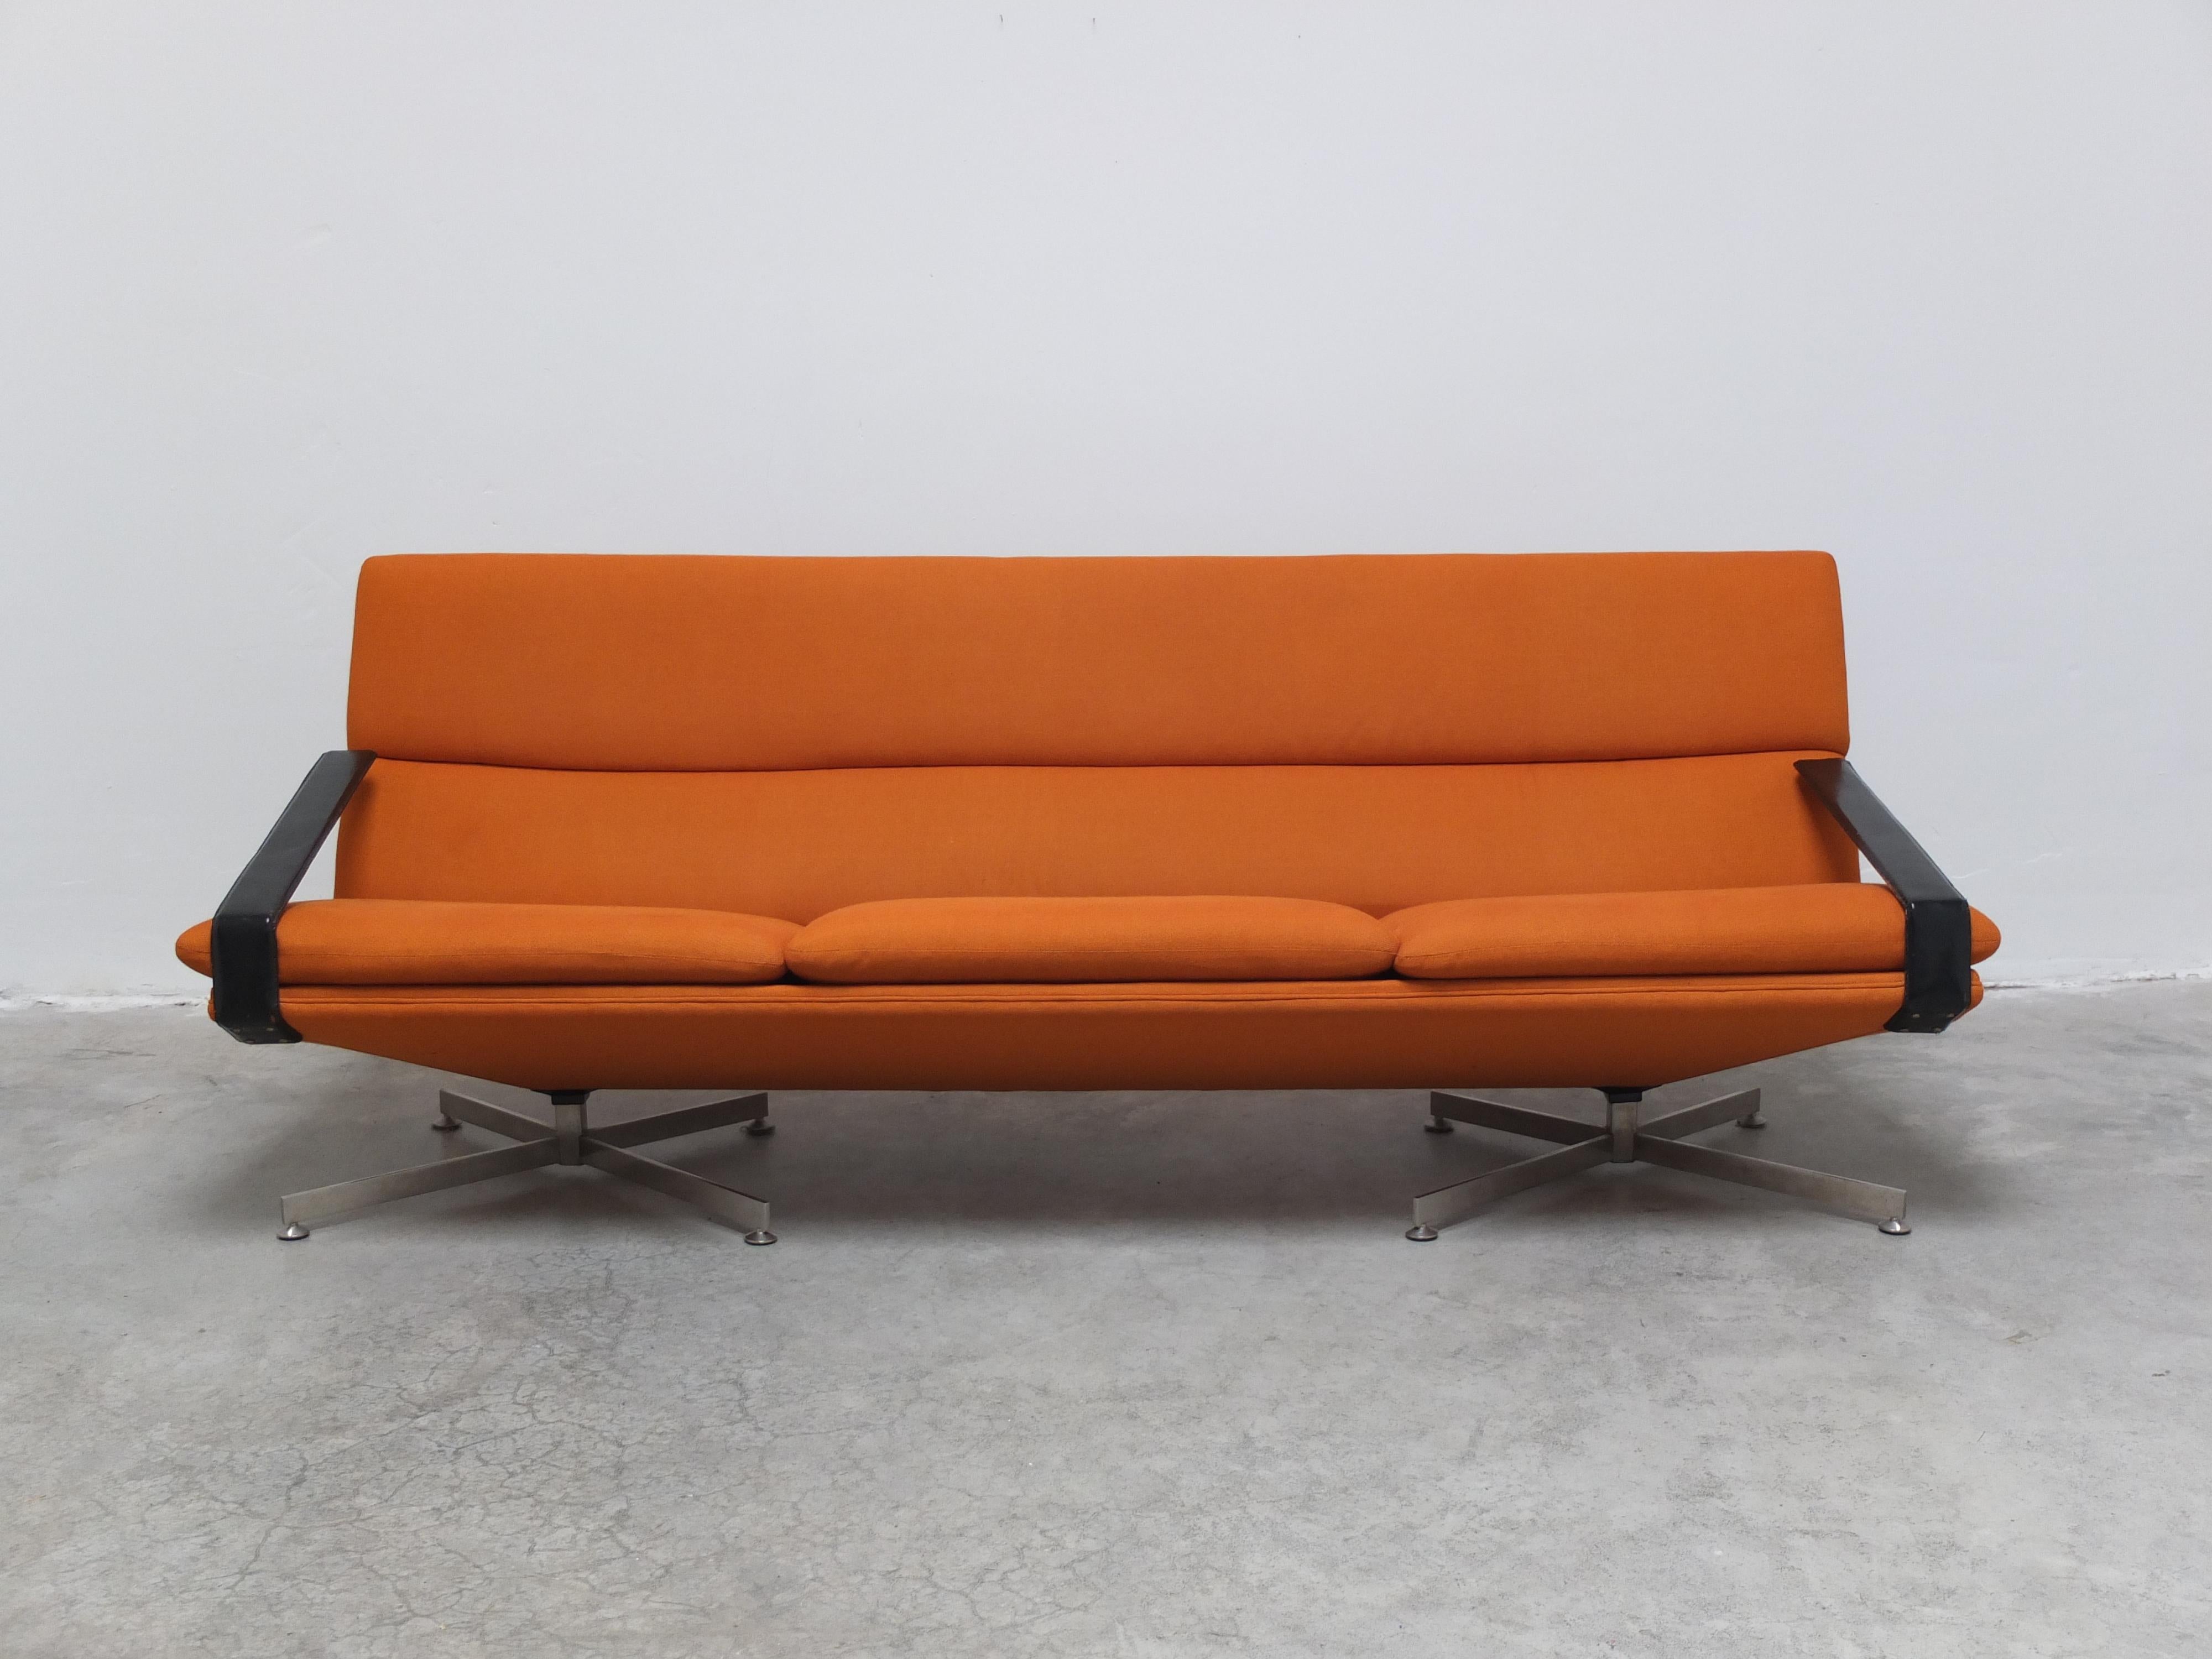 A rare modernist 3-seater sofa designed by Georges Van Rijck for Beaufort during the 1960s. It has a double metal star-shaped base that is also found on the separate lounge chairs. Particular on this example are the armrests which I have not seen